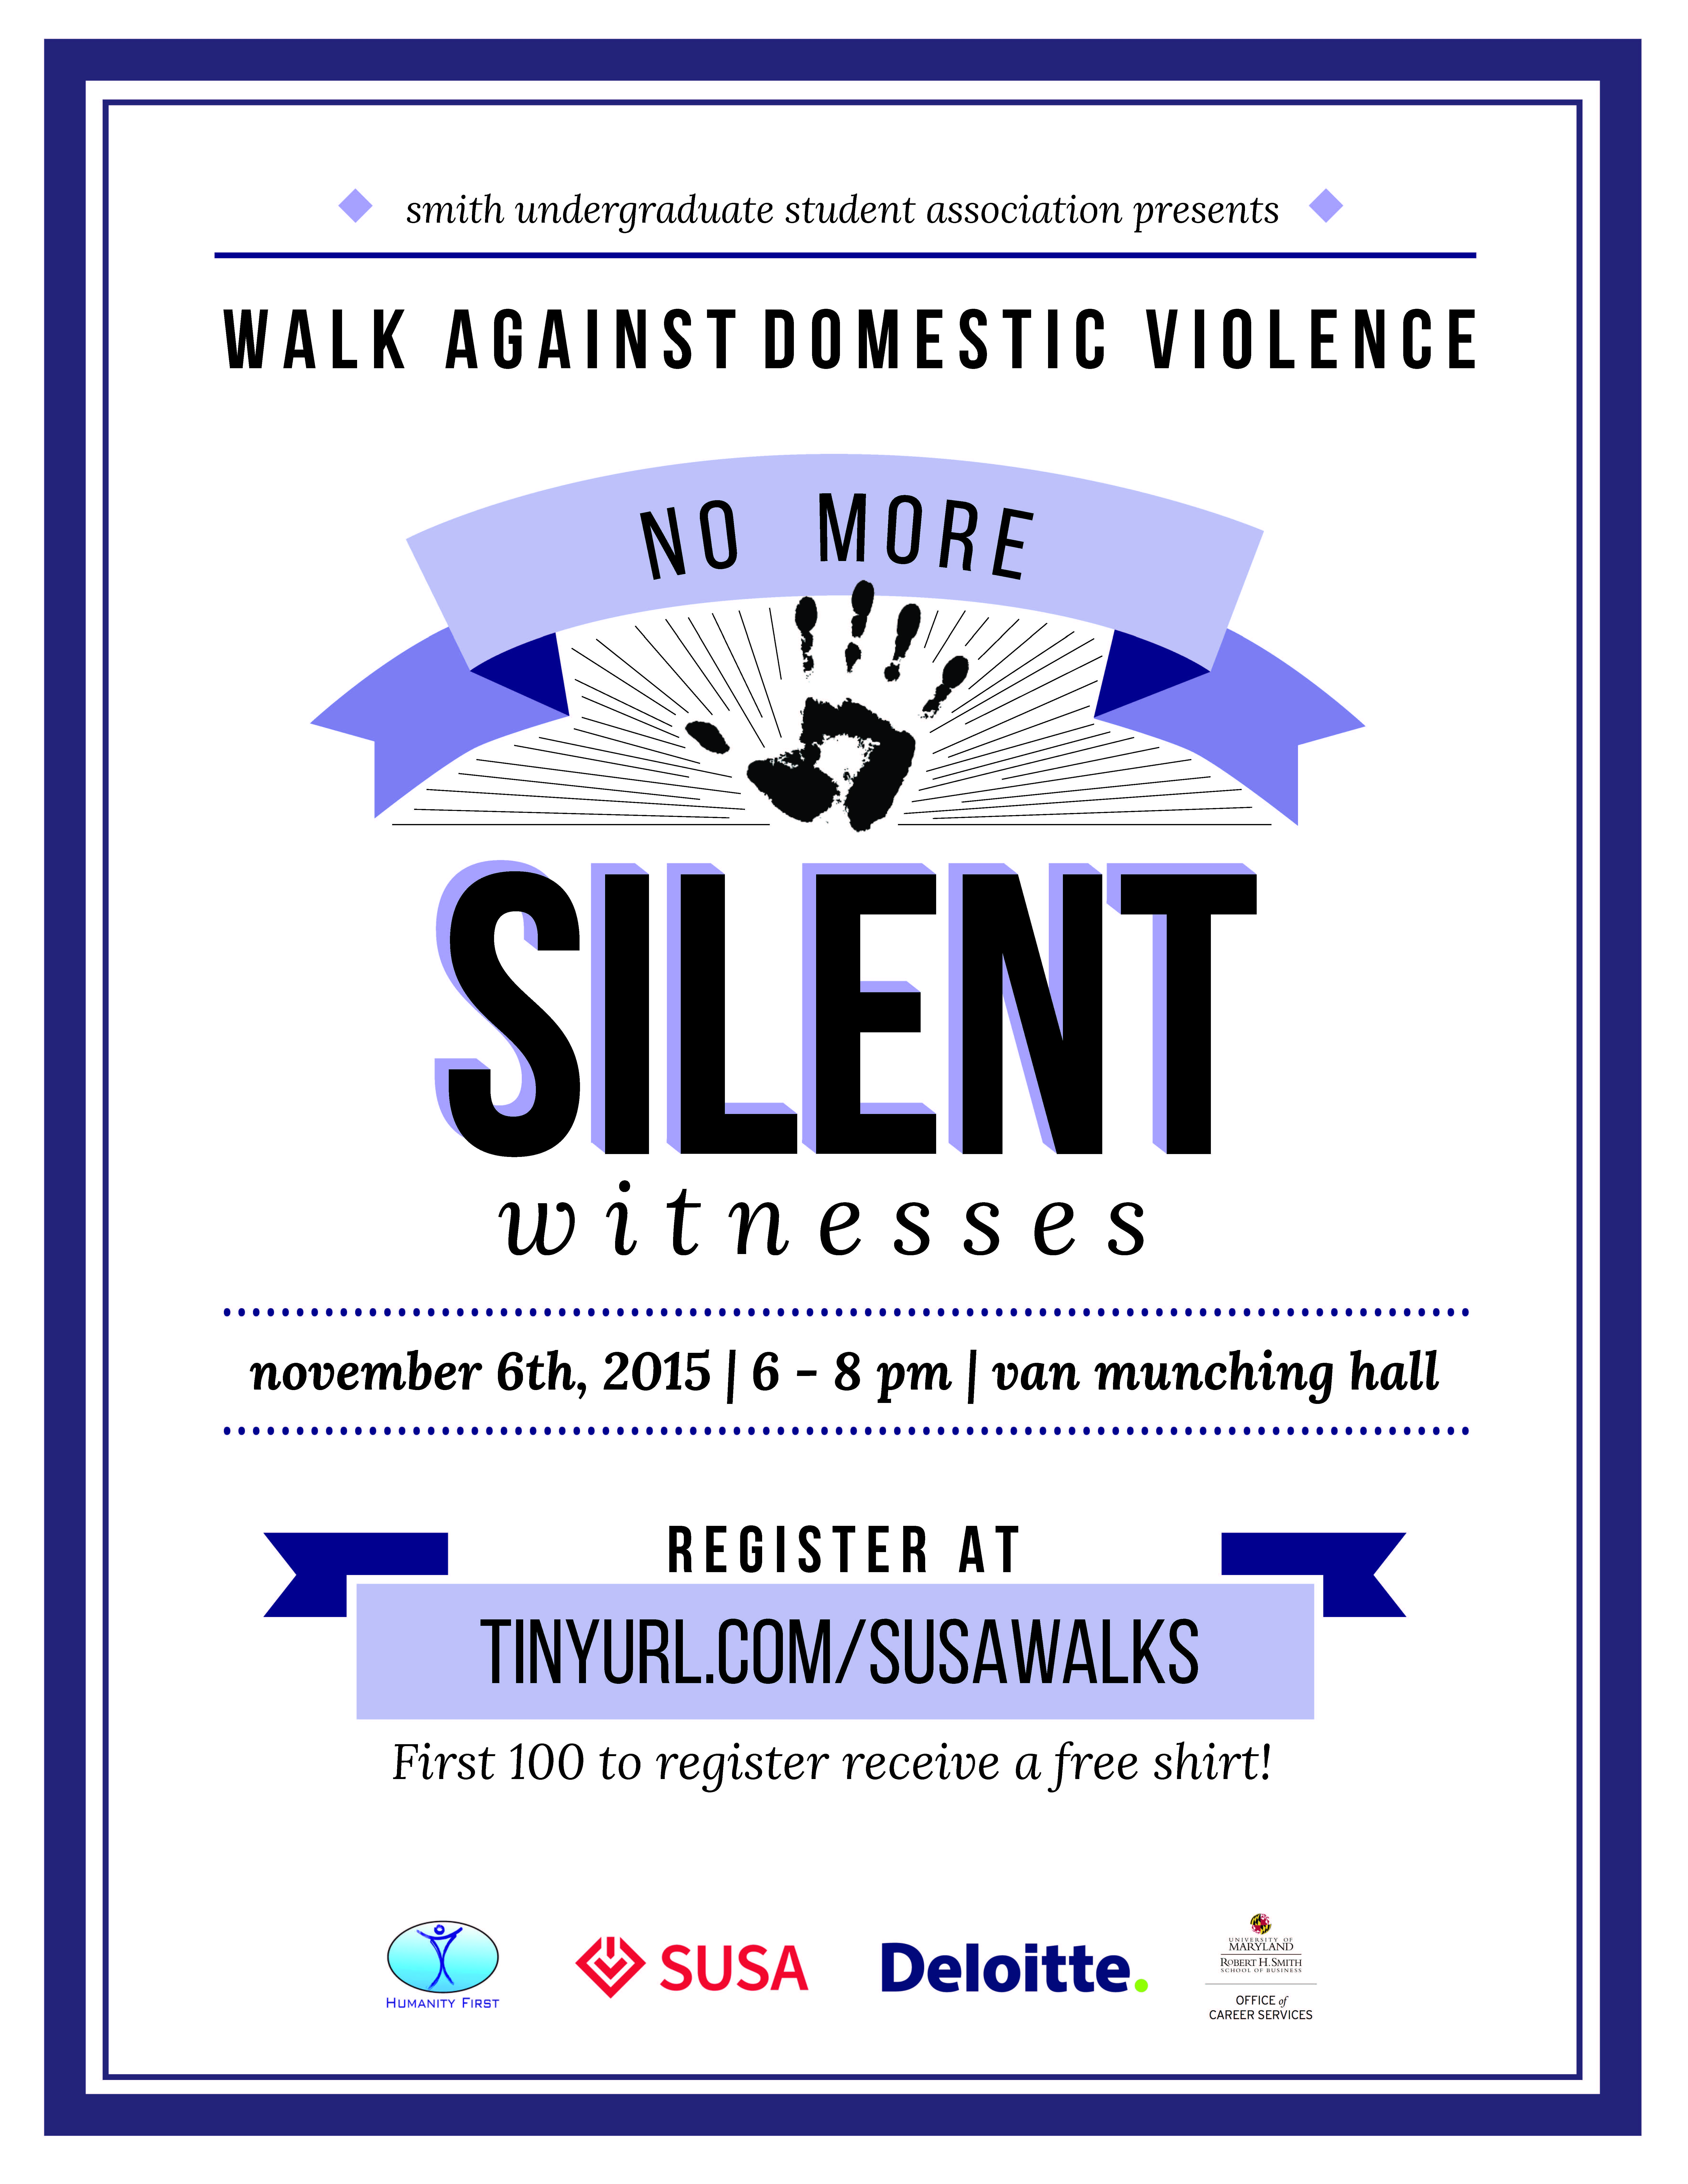 Students Organize Walk Against Domestic Violence